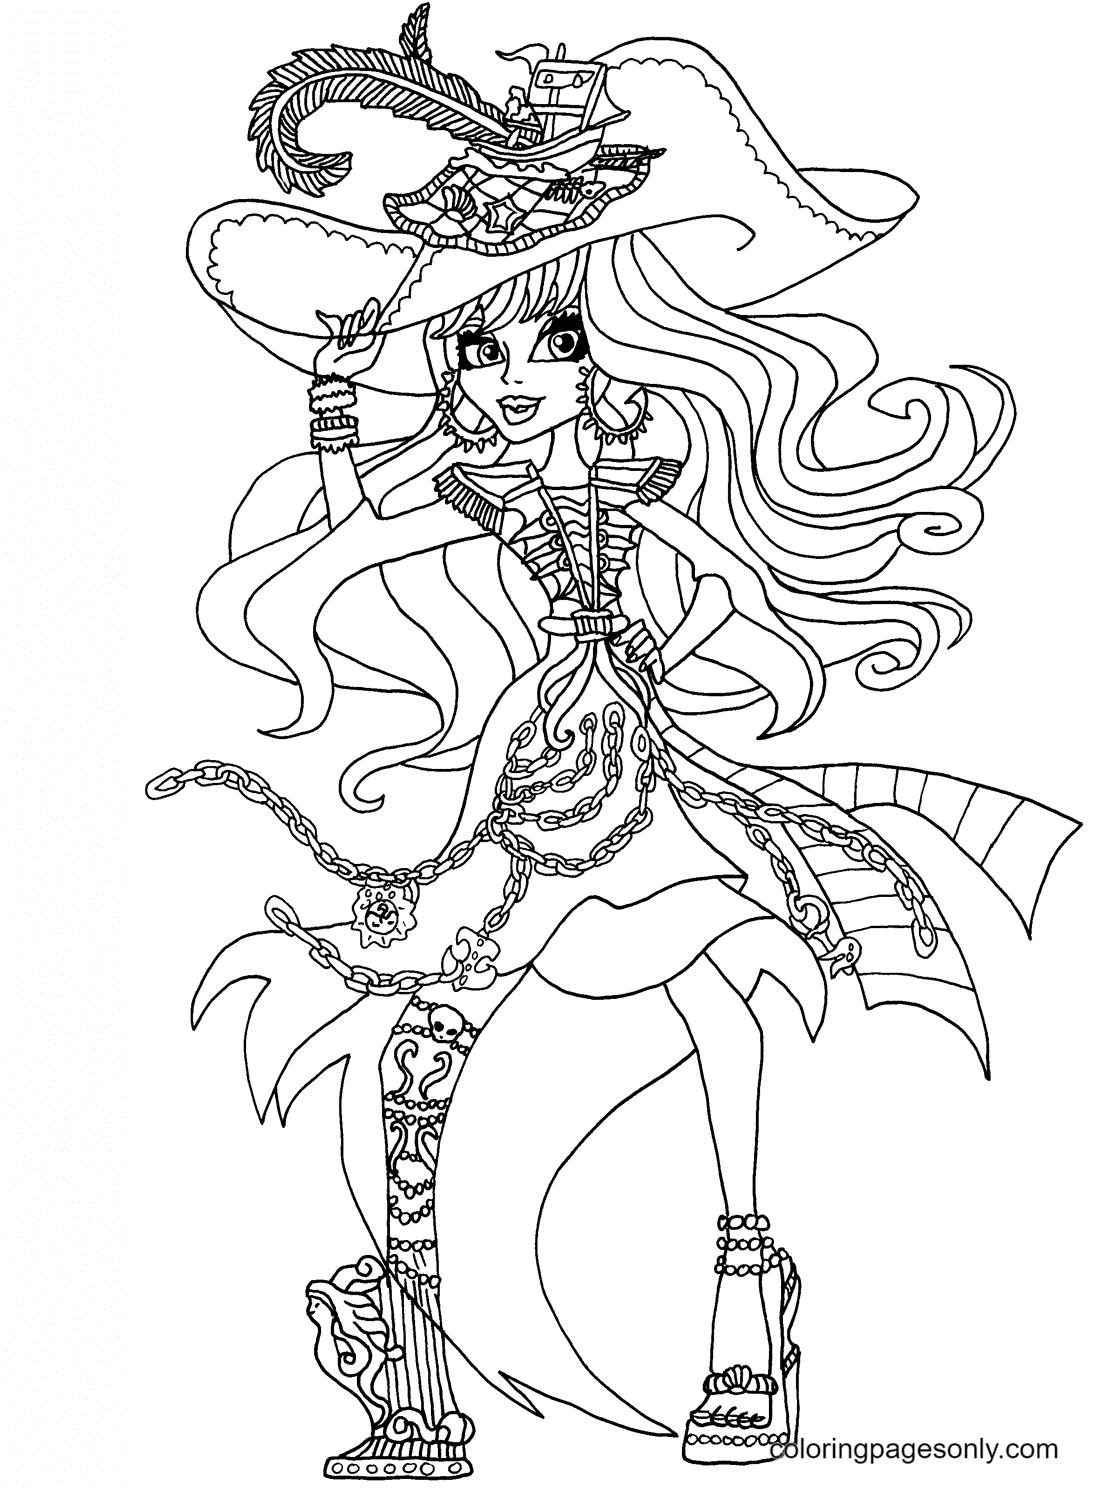 Haunted Vandala Doubloons Coloring Page